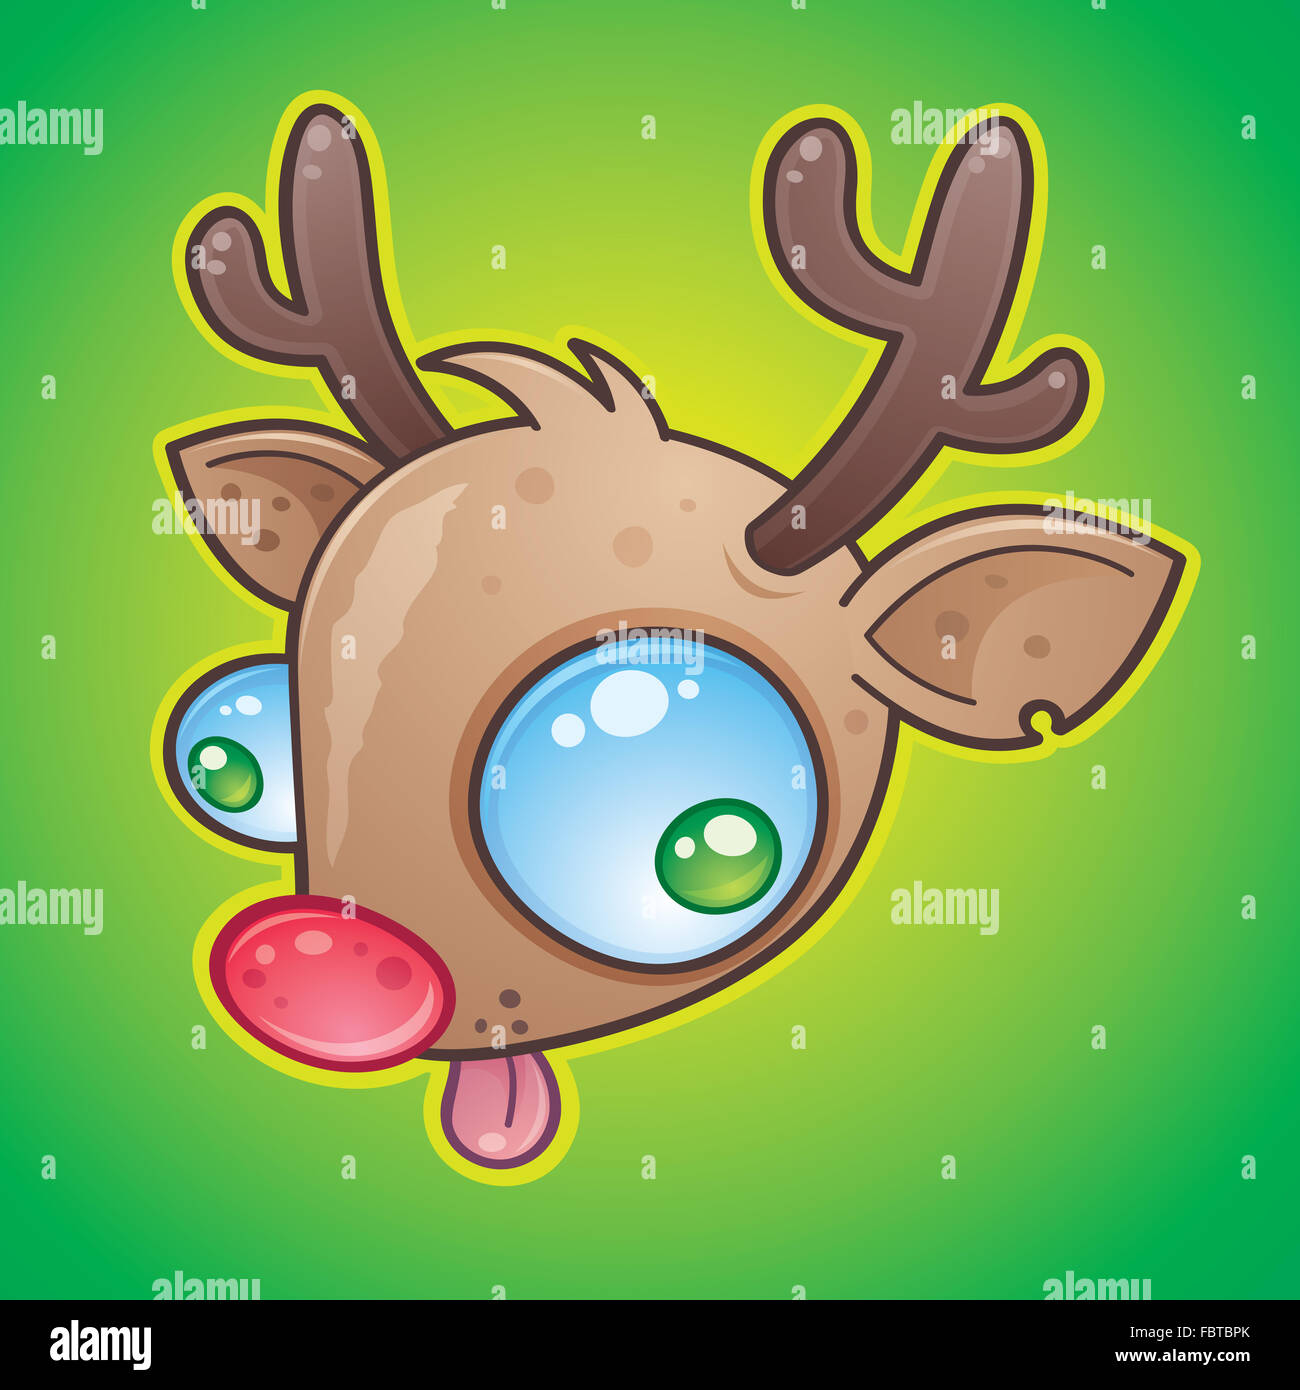 Rudolph The Red Nosed Reindeer Stock Photo